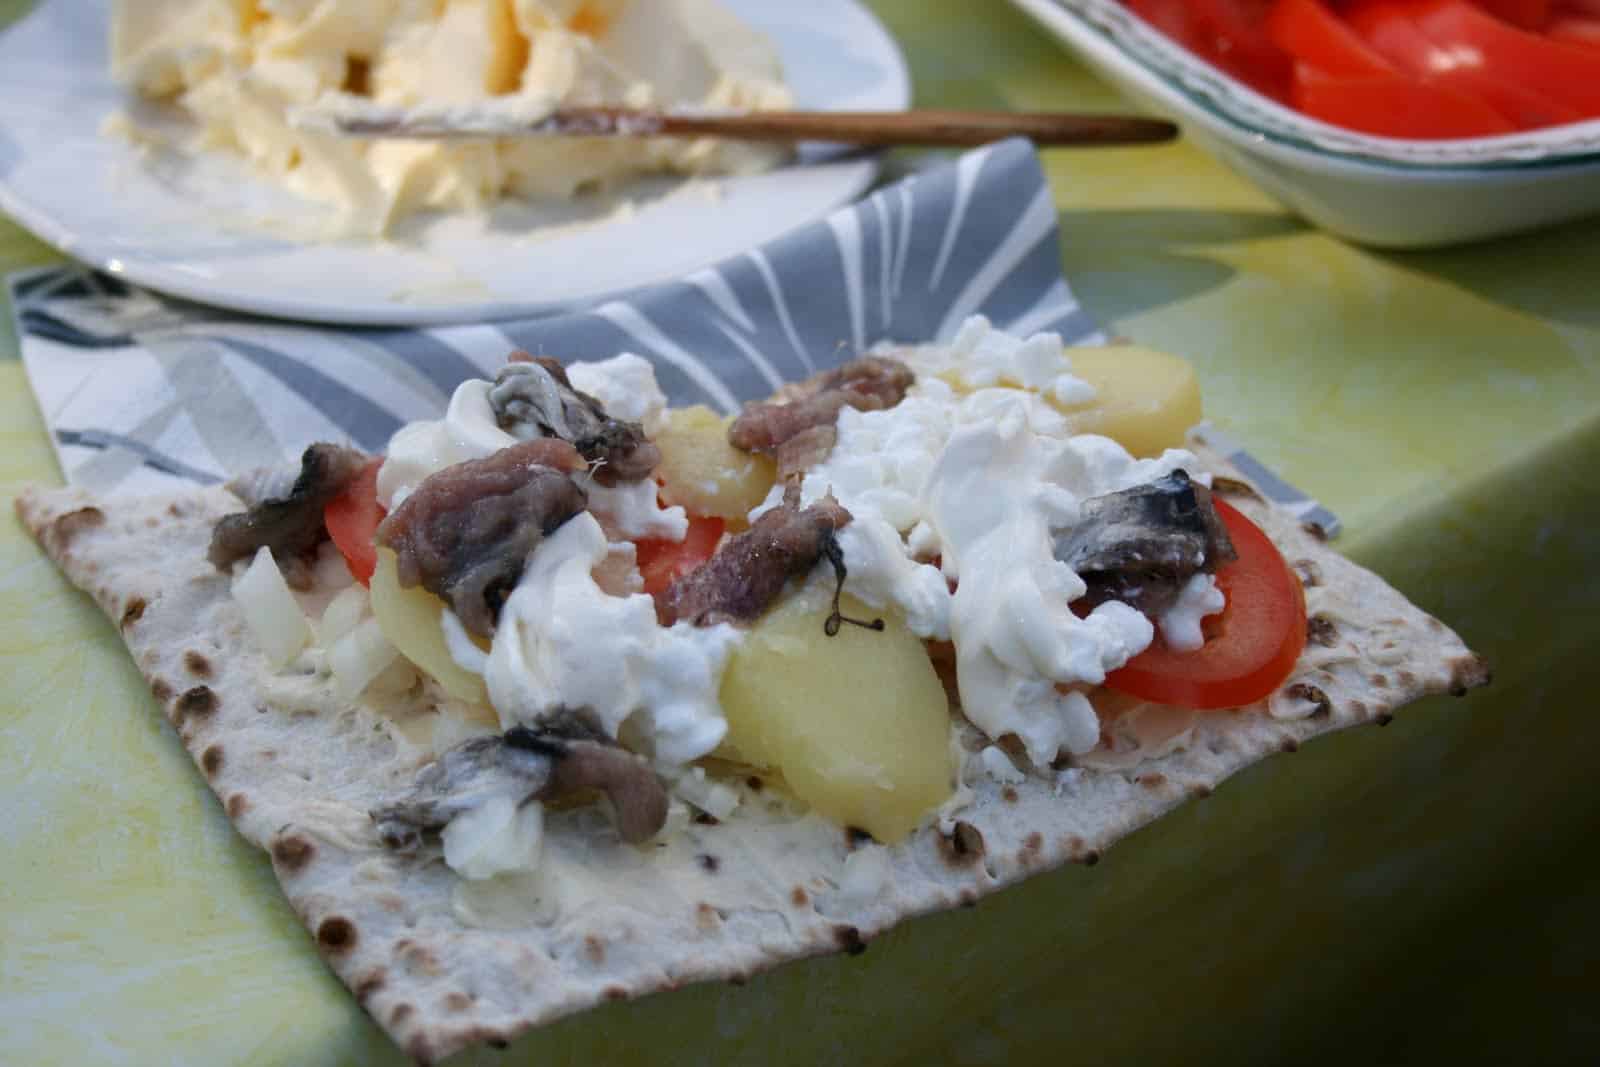 Have a go for SWEDEN'S NOTORIOUS SURSTRÖMMING (FERMENTED HERRING